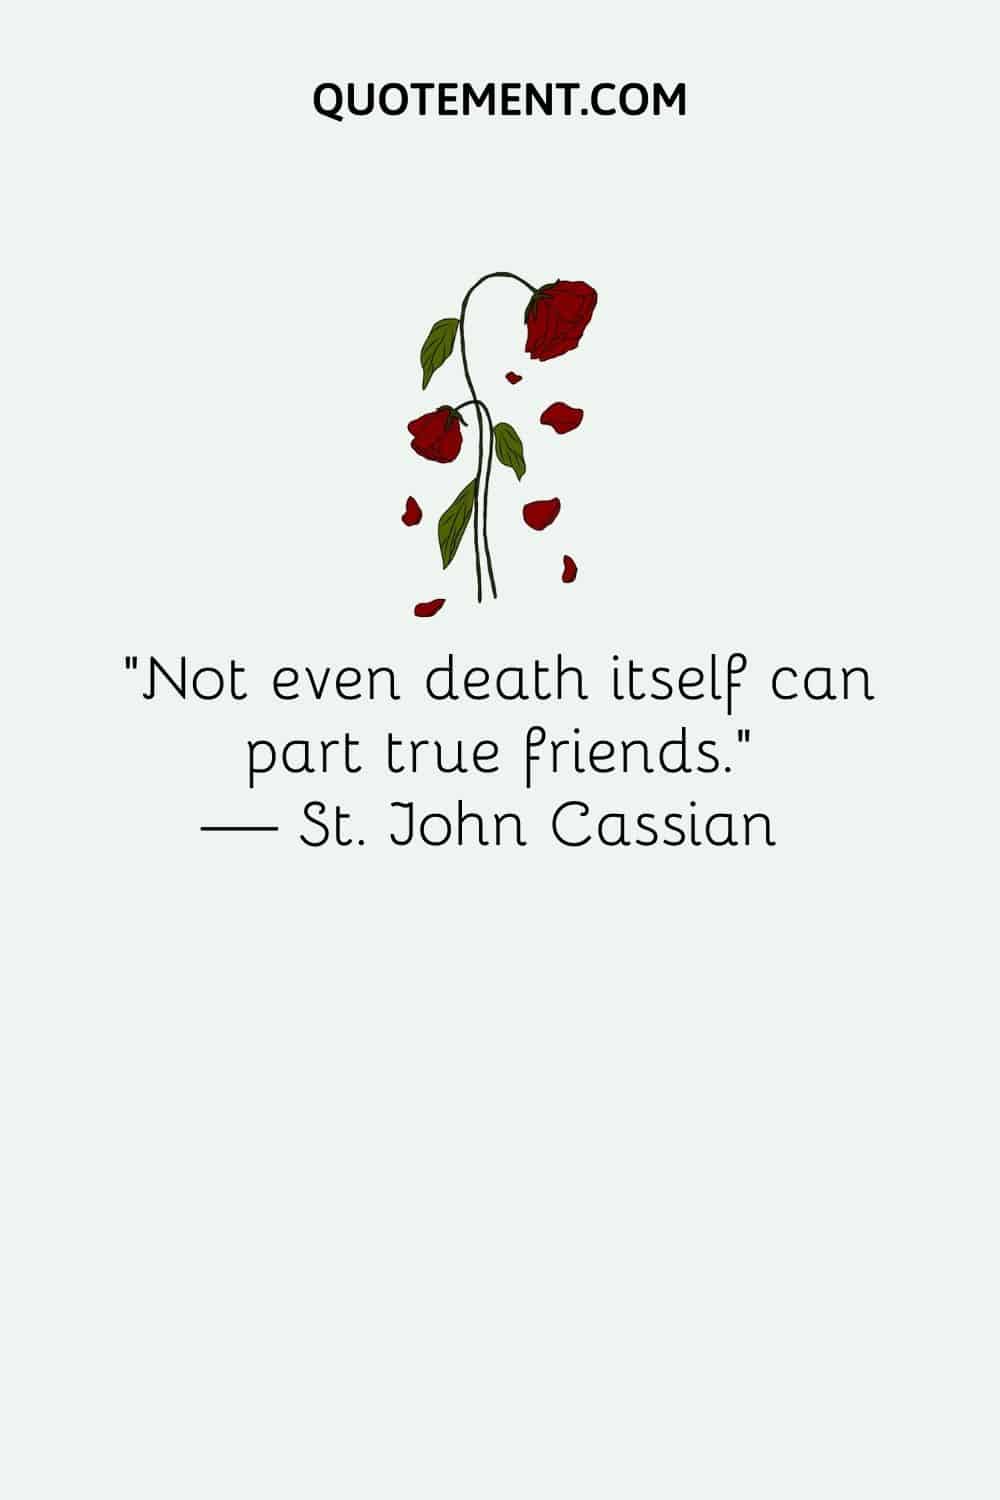 image of red roses representing death quote for friend